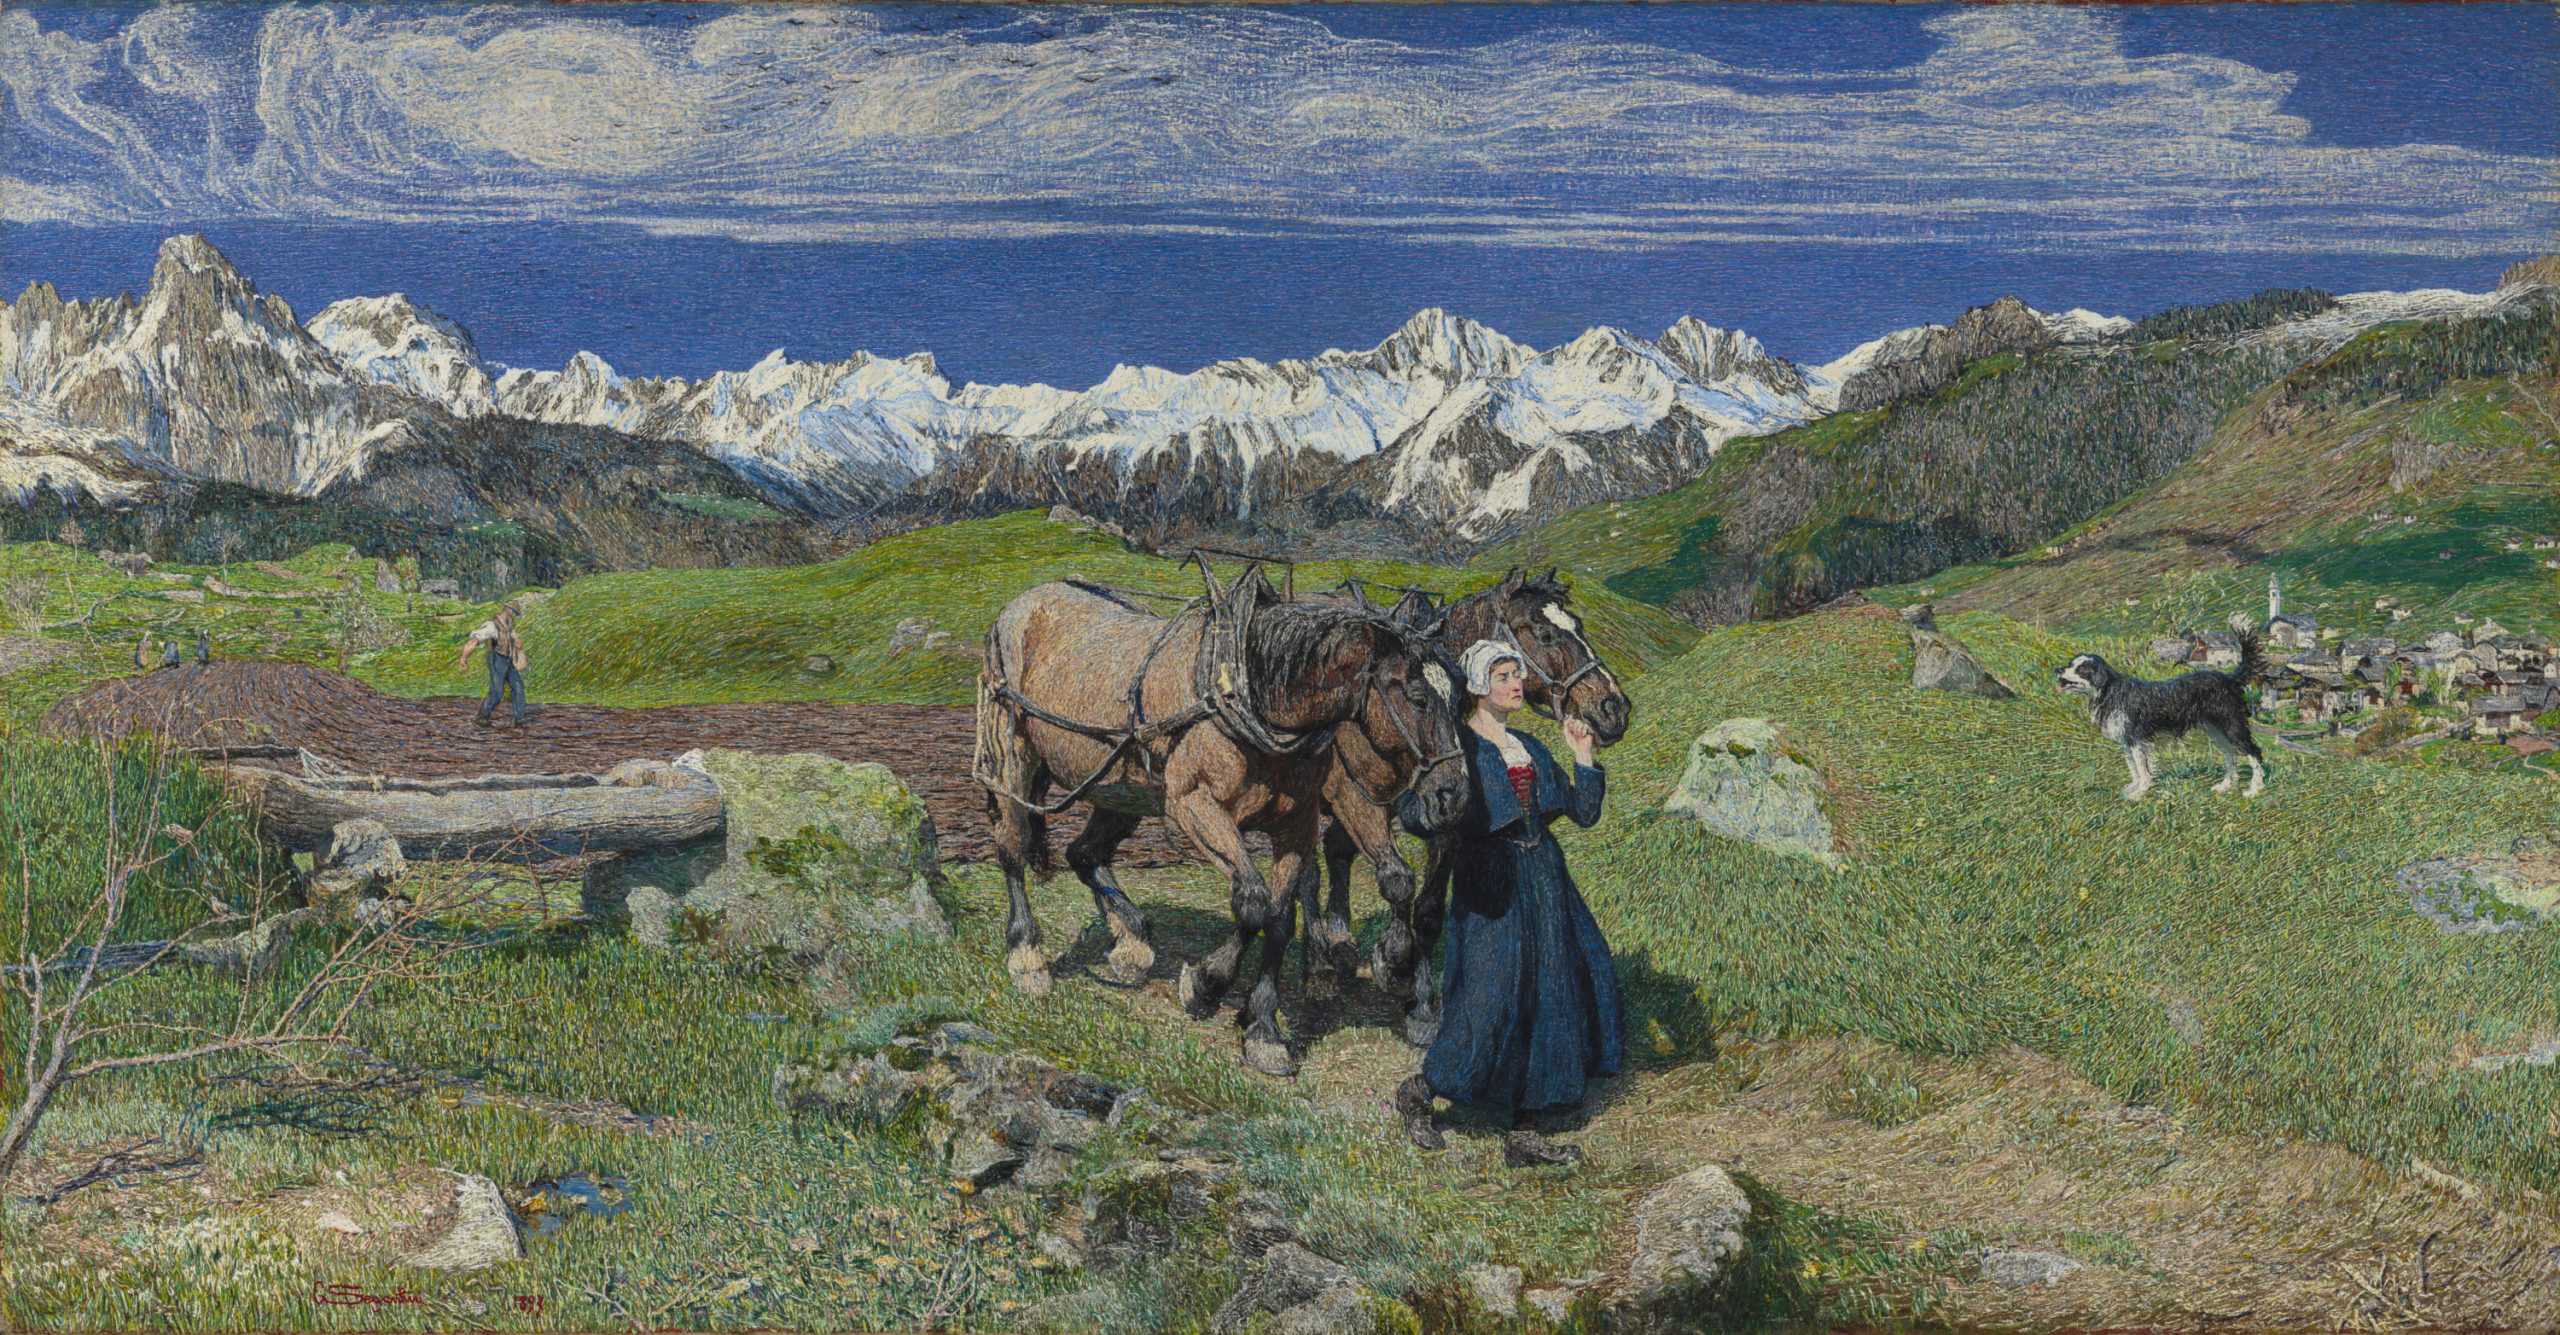 A woman walking two horses across a field with snow-peaked mountains in the background